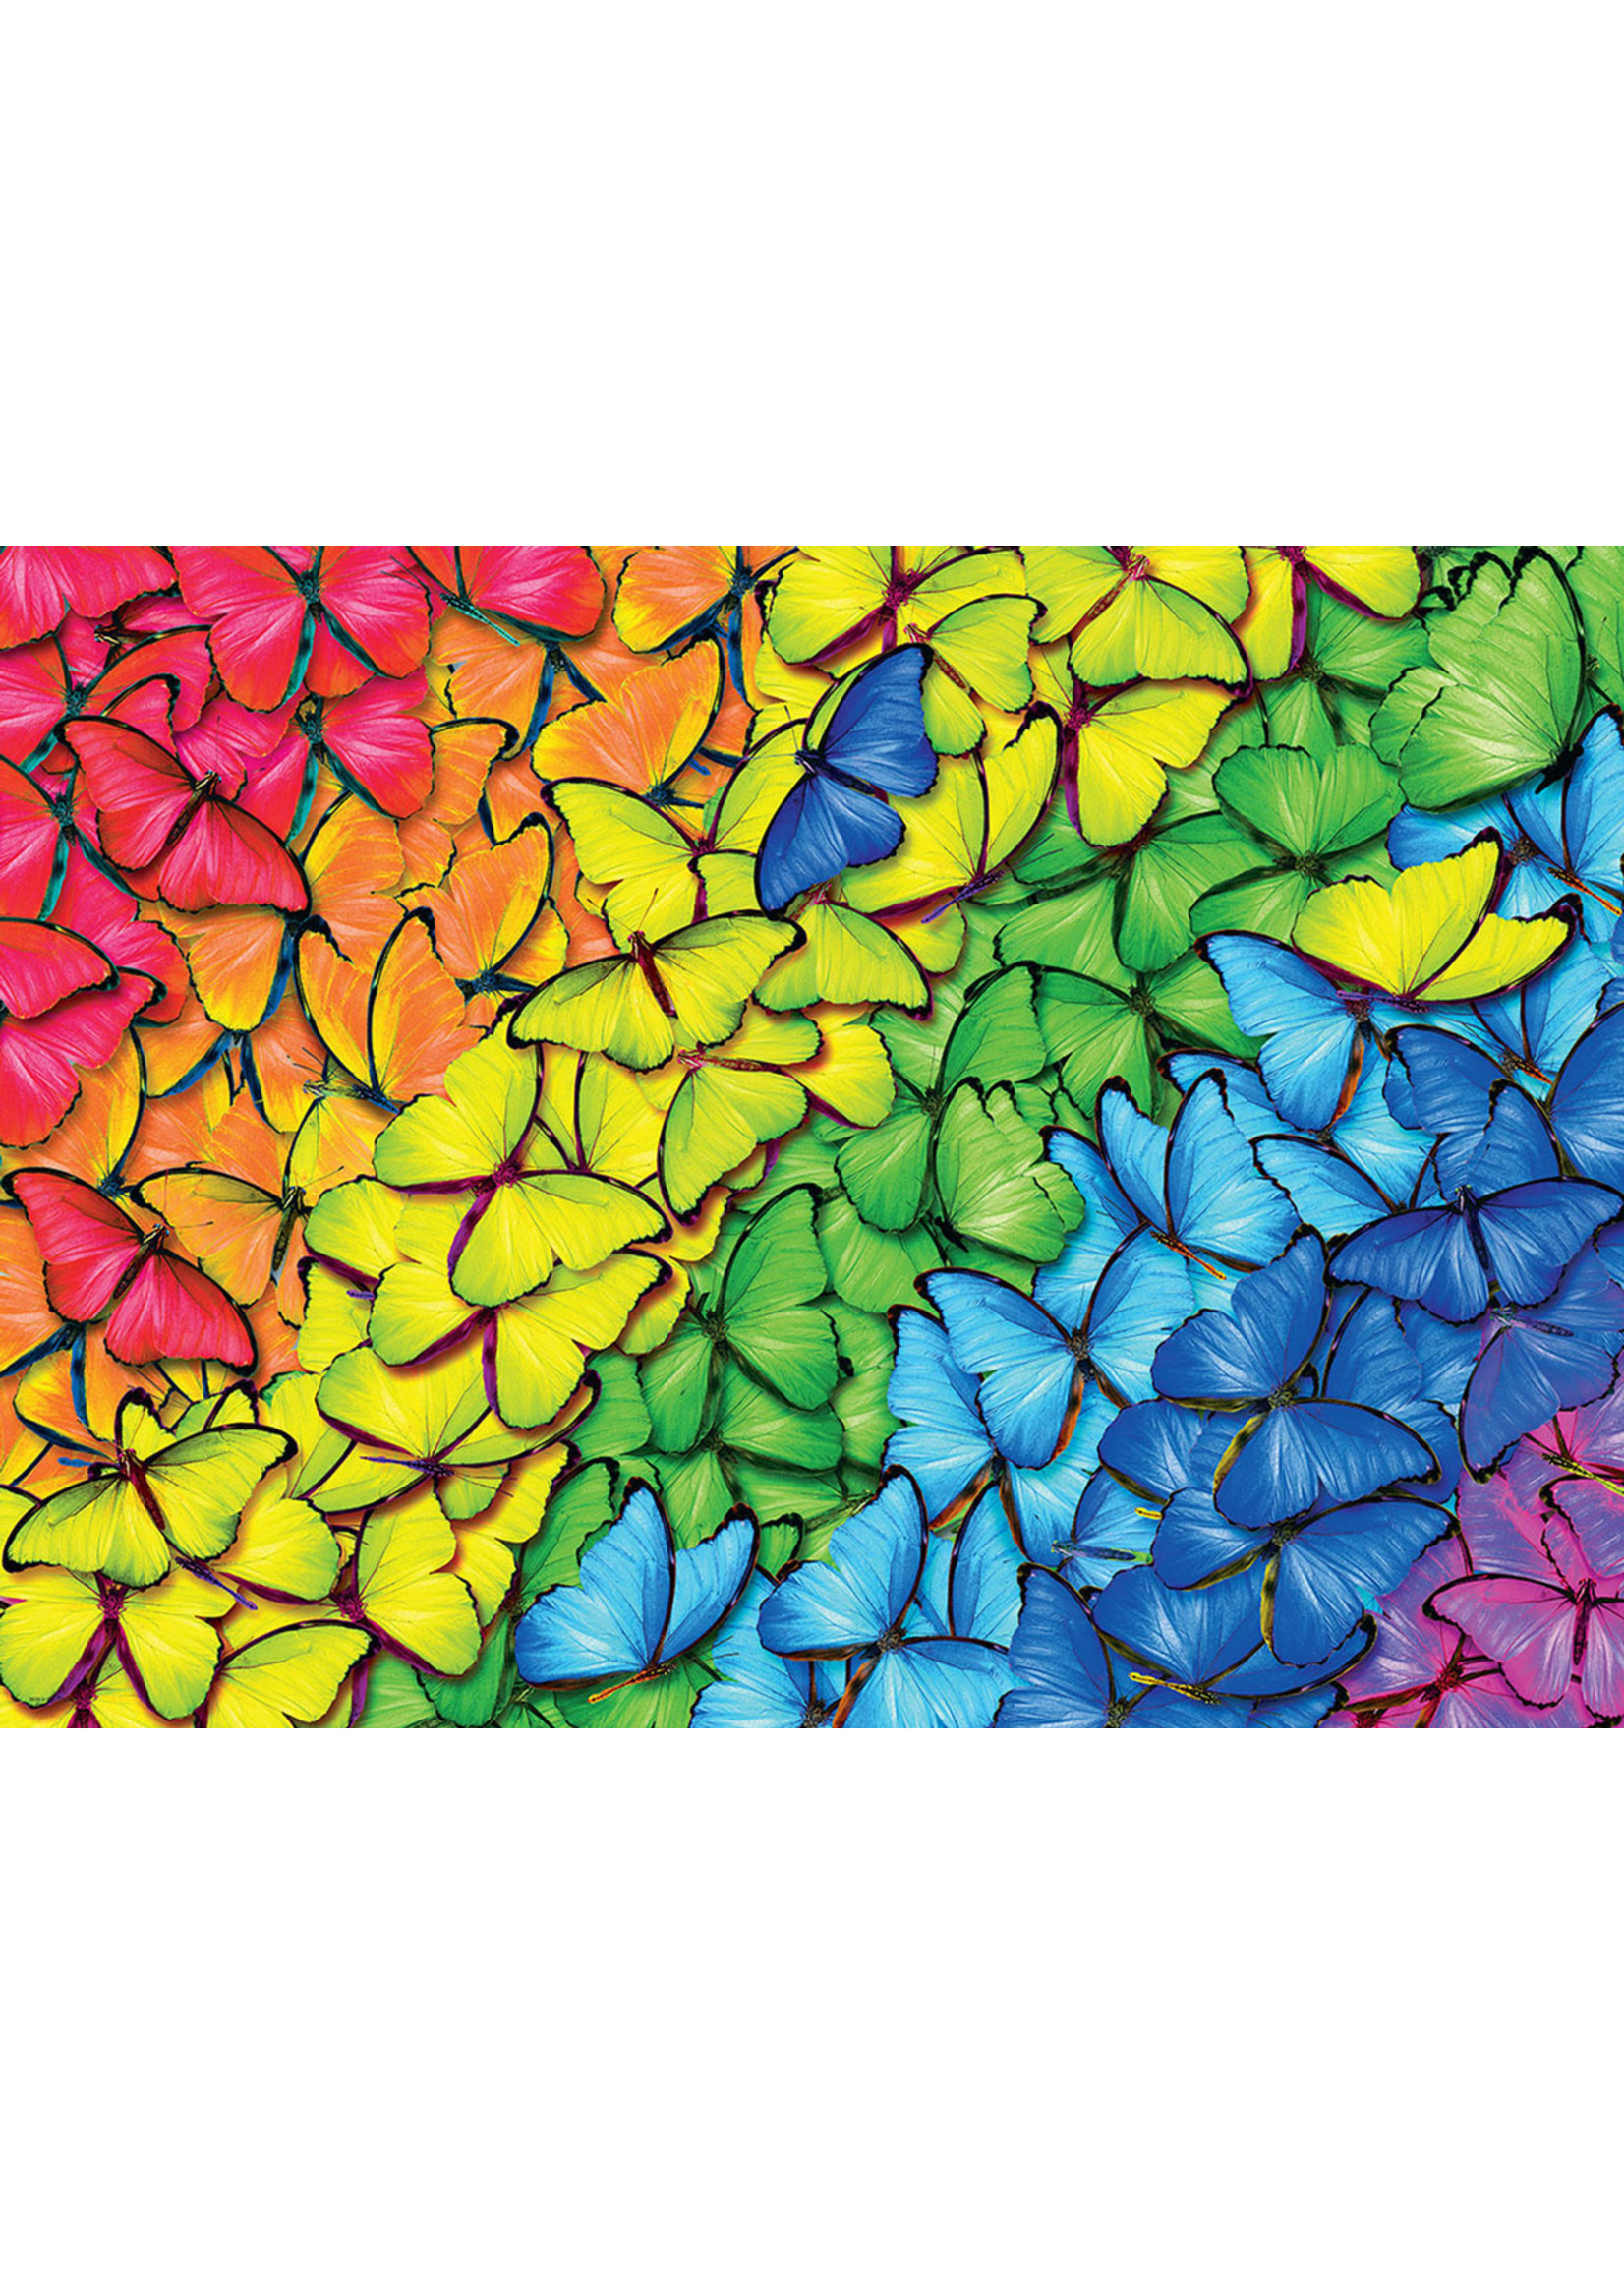 Eurographics Butterfly Rainbow - 1000 Piece Puzzle